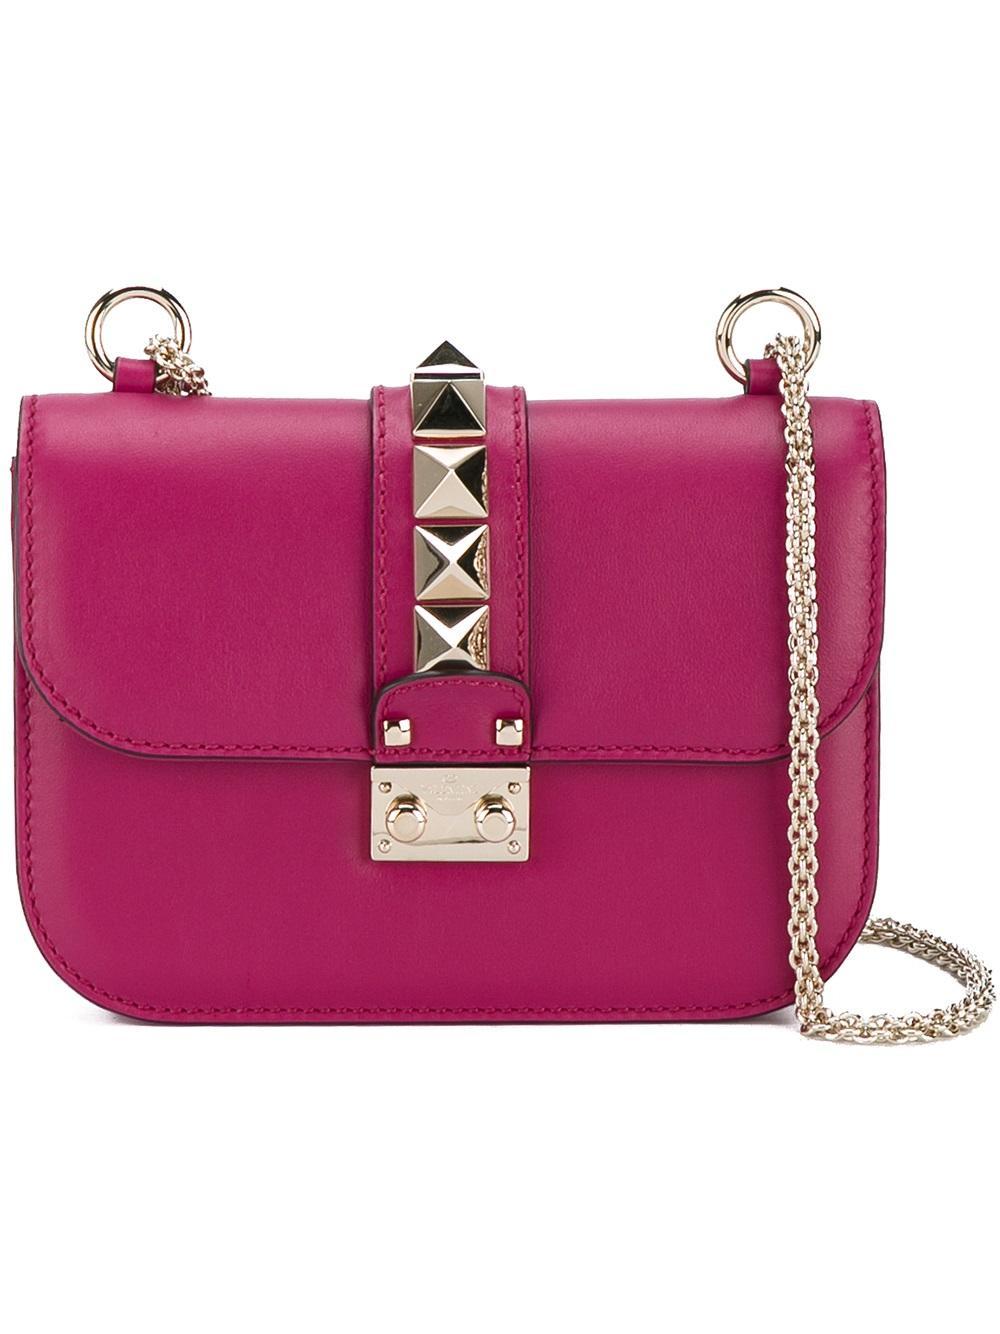 Lyst - Valentino Lock Small Leather Shoulder Bag in Purple